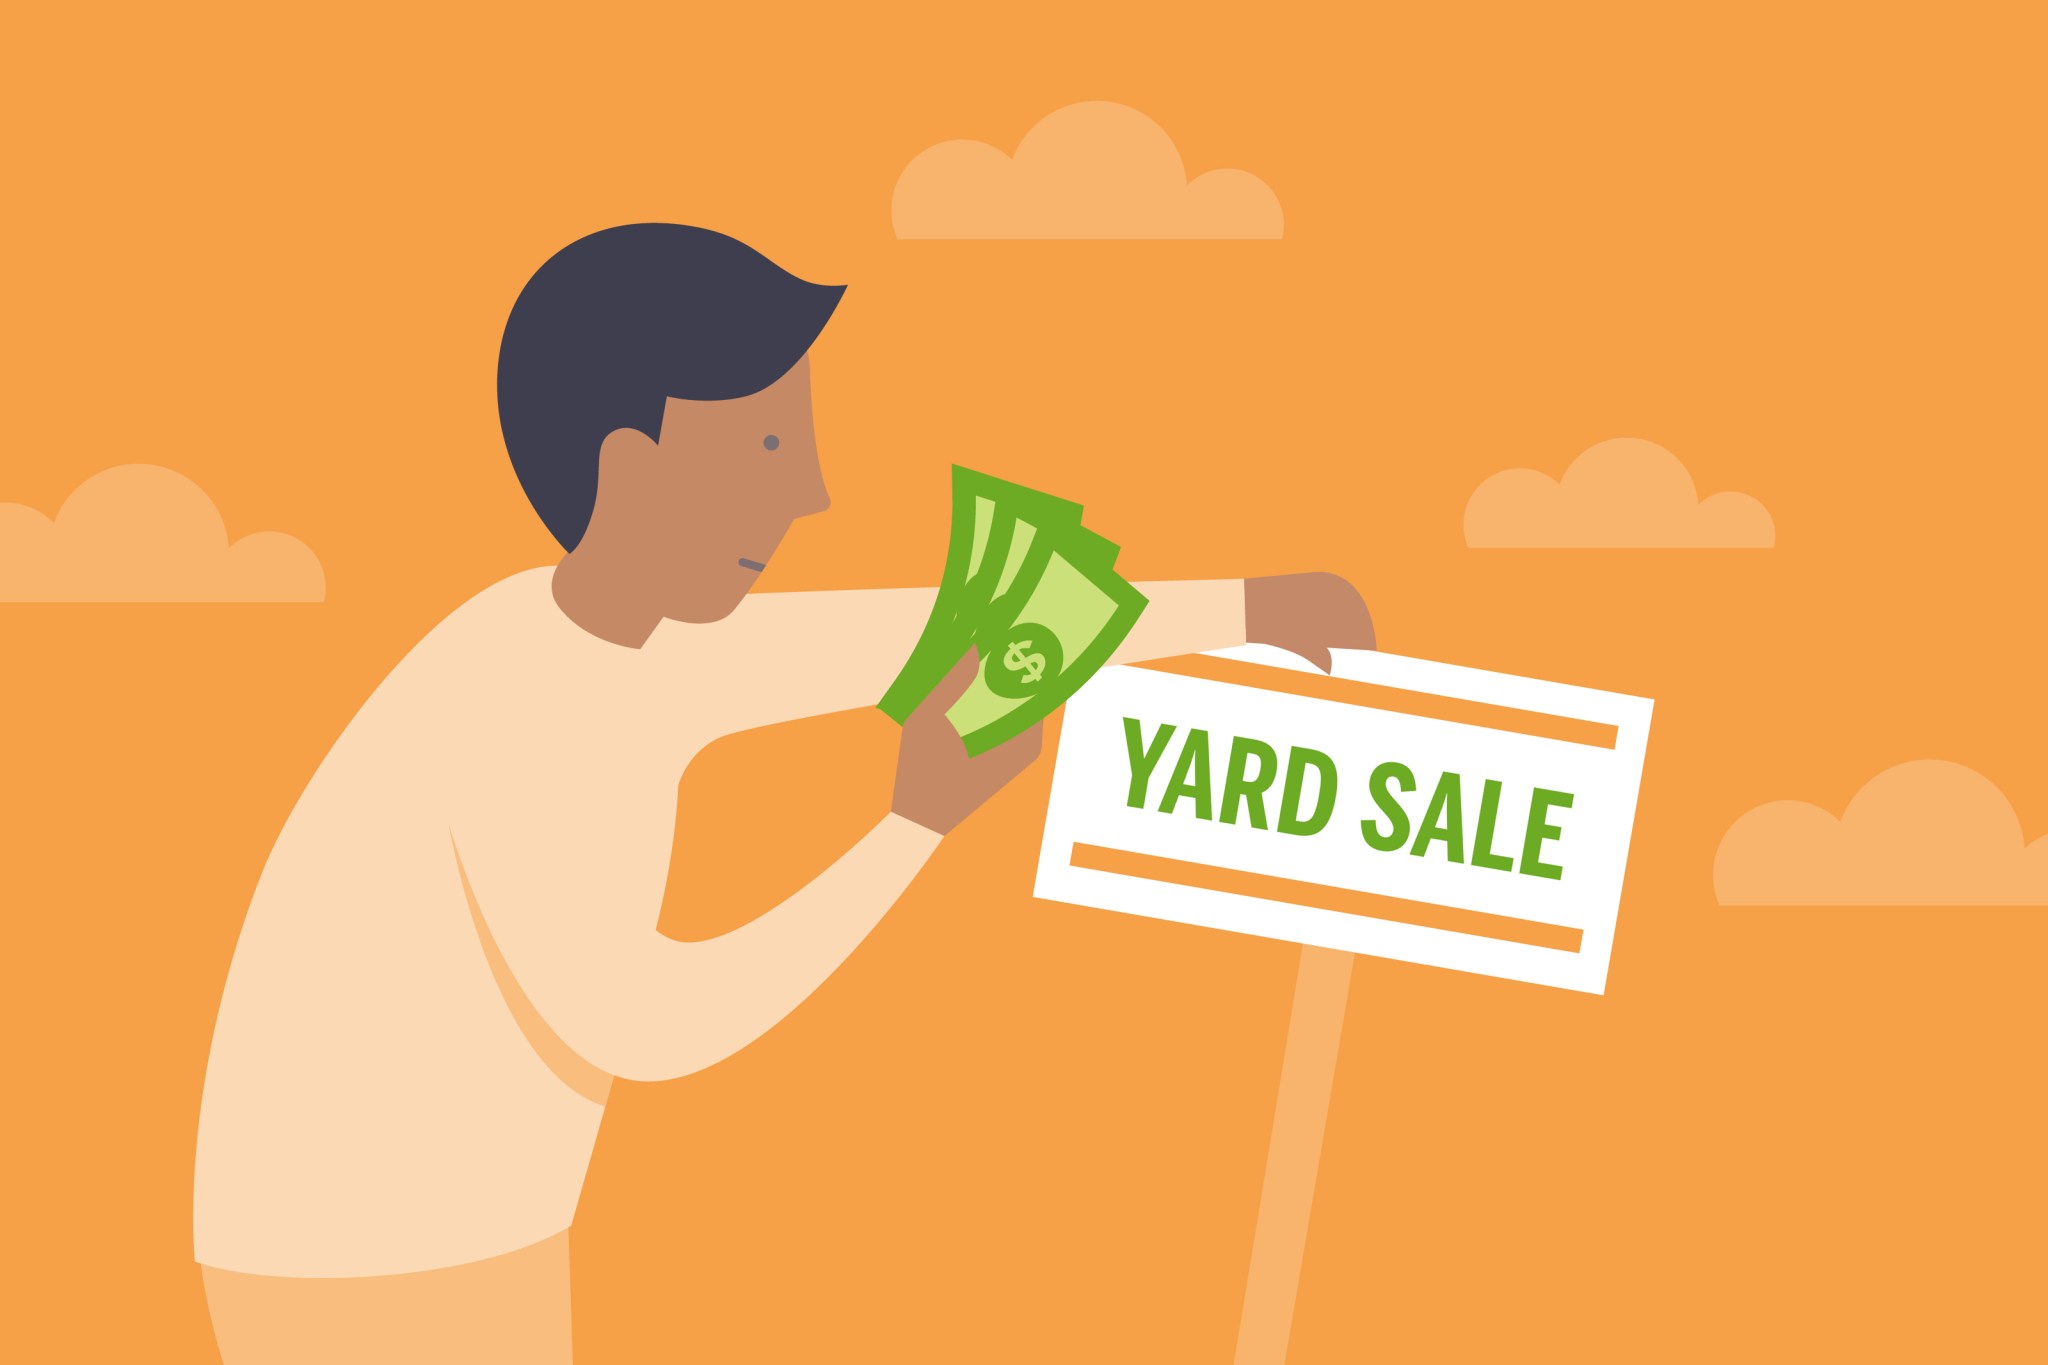 Illustration of man with a yard sale sign